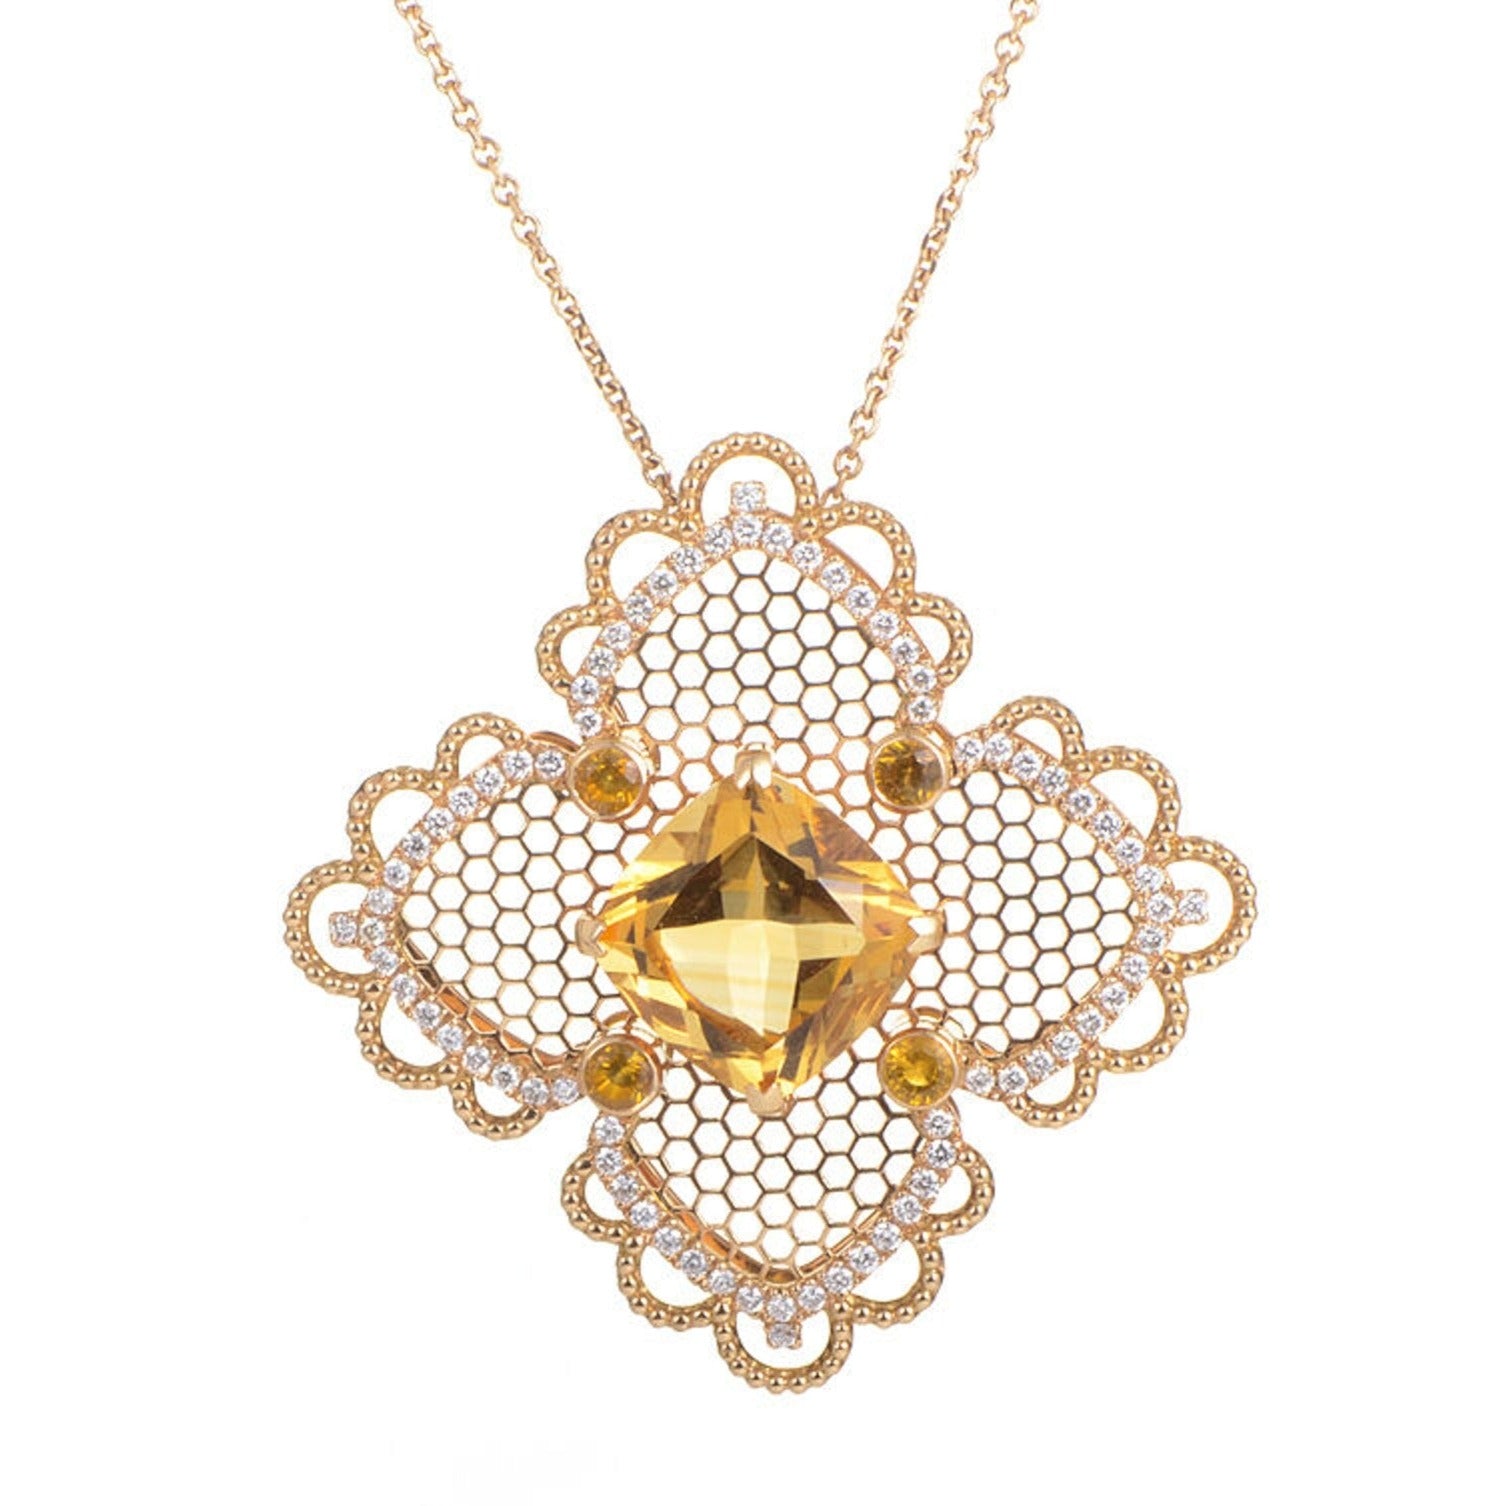 Citrine and Diamond Lace Pendant Necklace in 18k Yellow Gold - HM1583SE